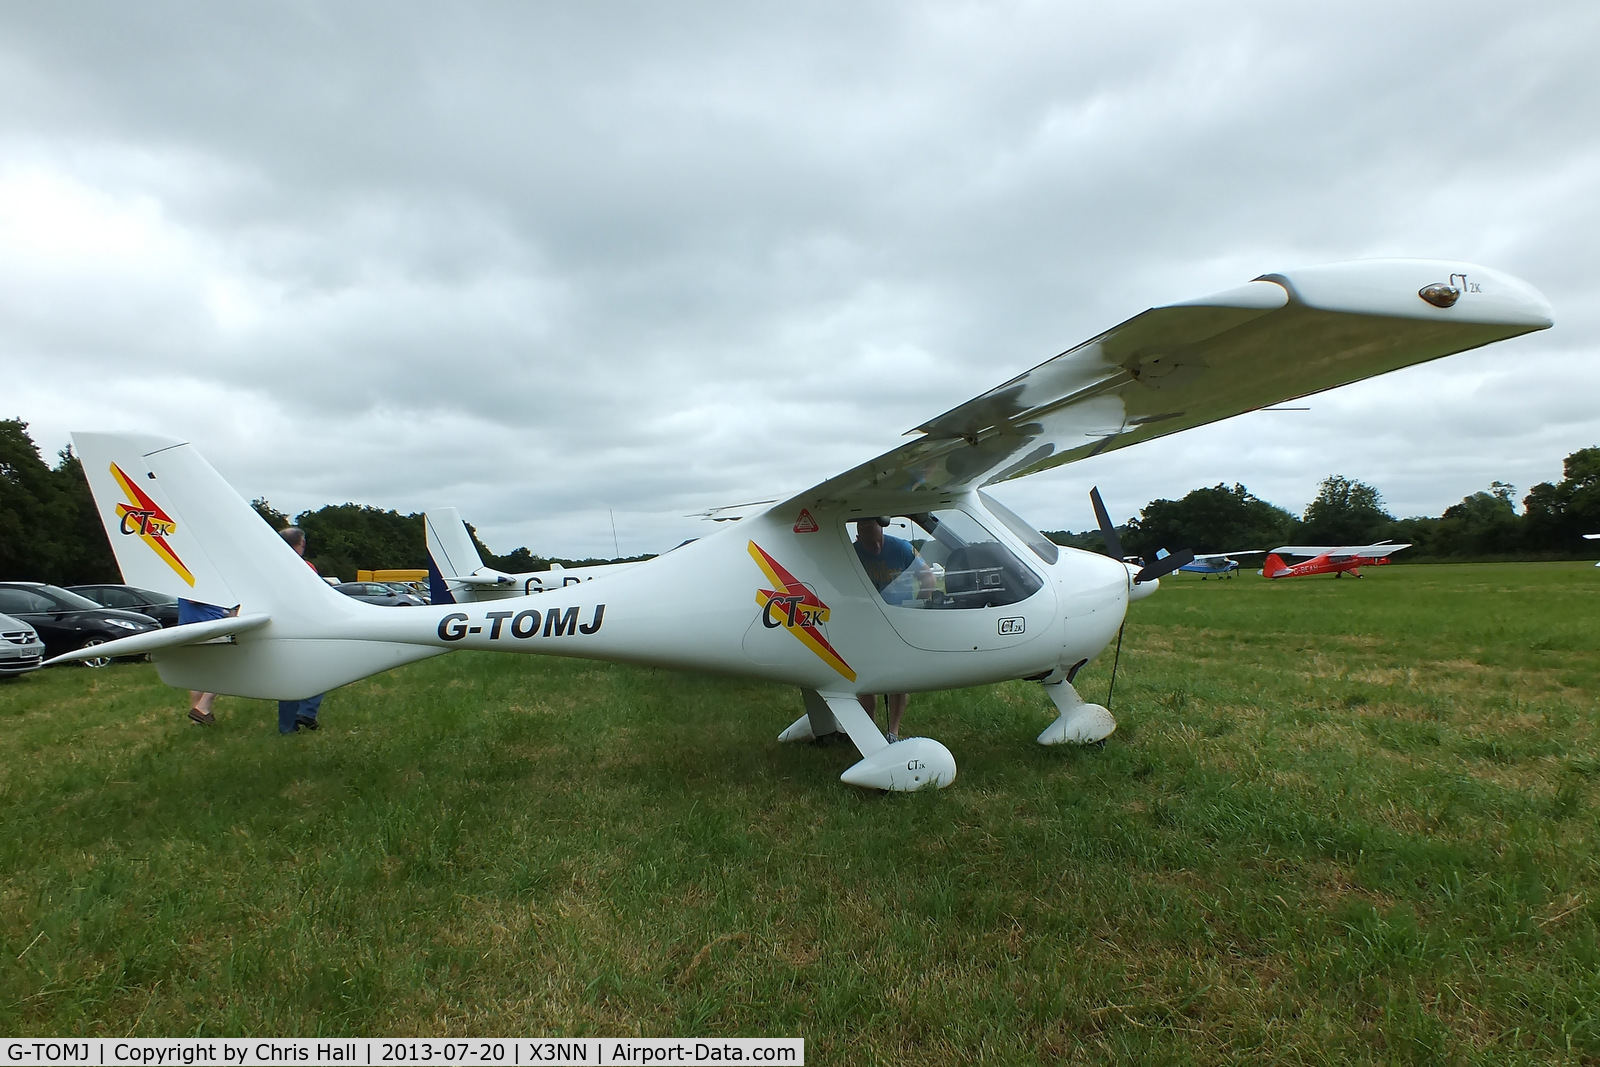 G-TOMJ, 2003 Flight Design CT2K C/N 7975, at the Stoke Golding stakeout 2013